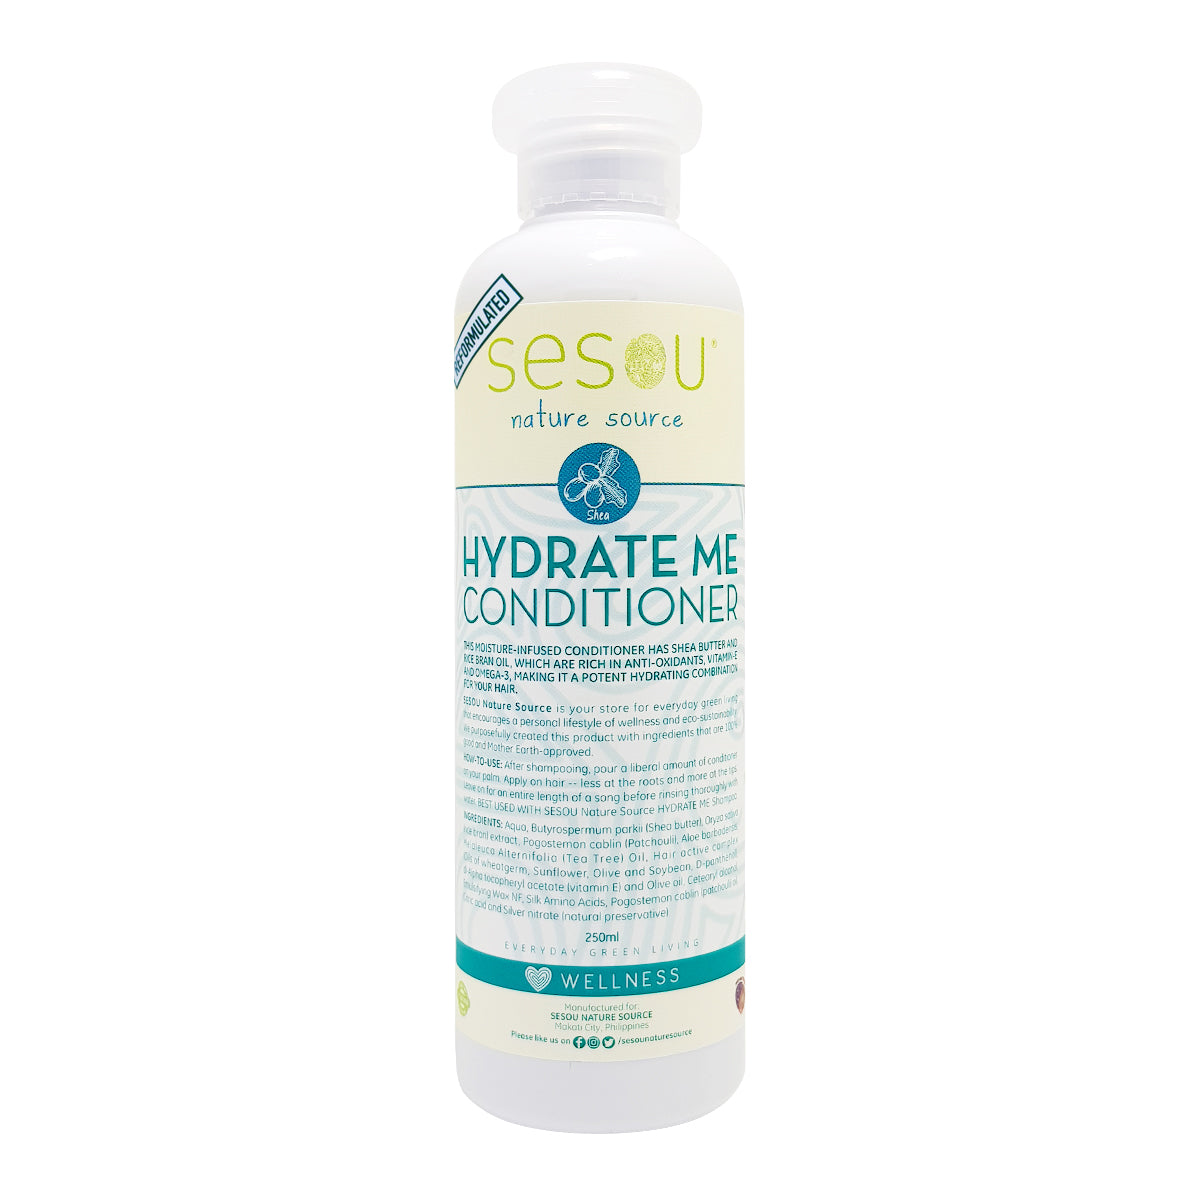 Hydrate Me Conditioner 250ml "REFORMULATED"